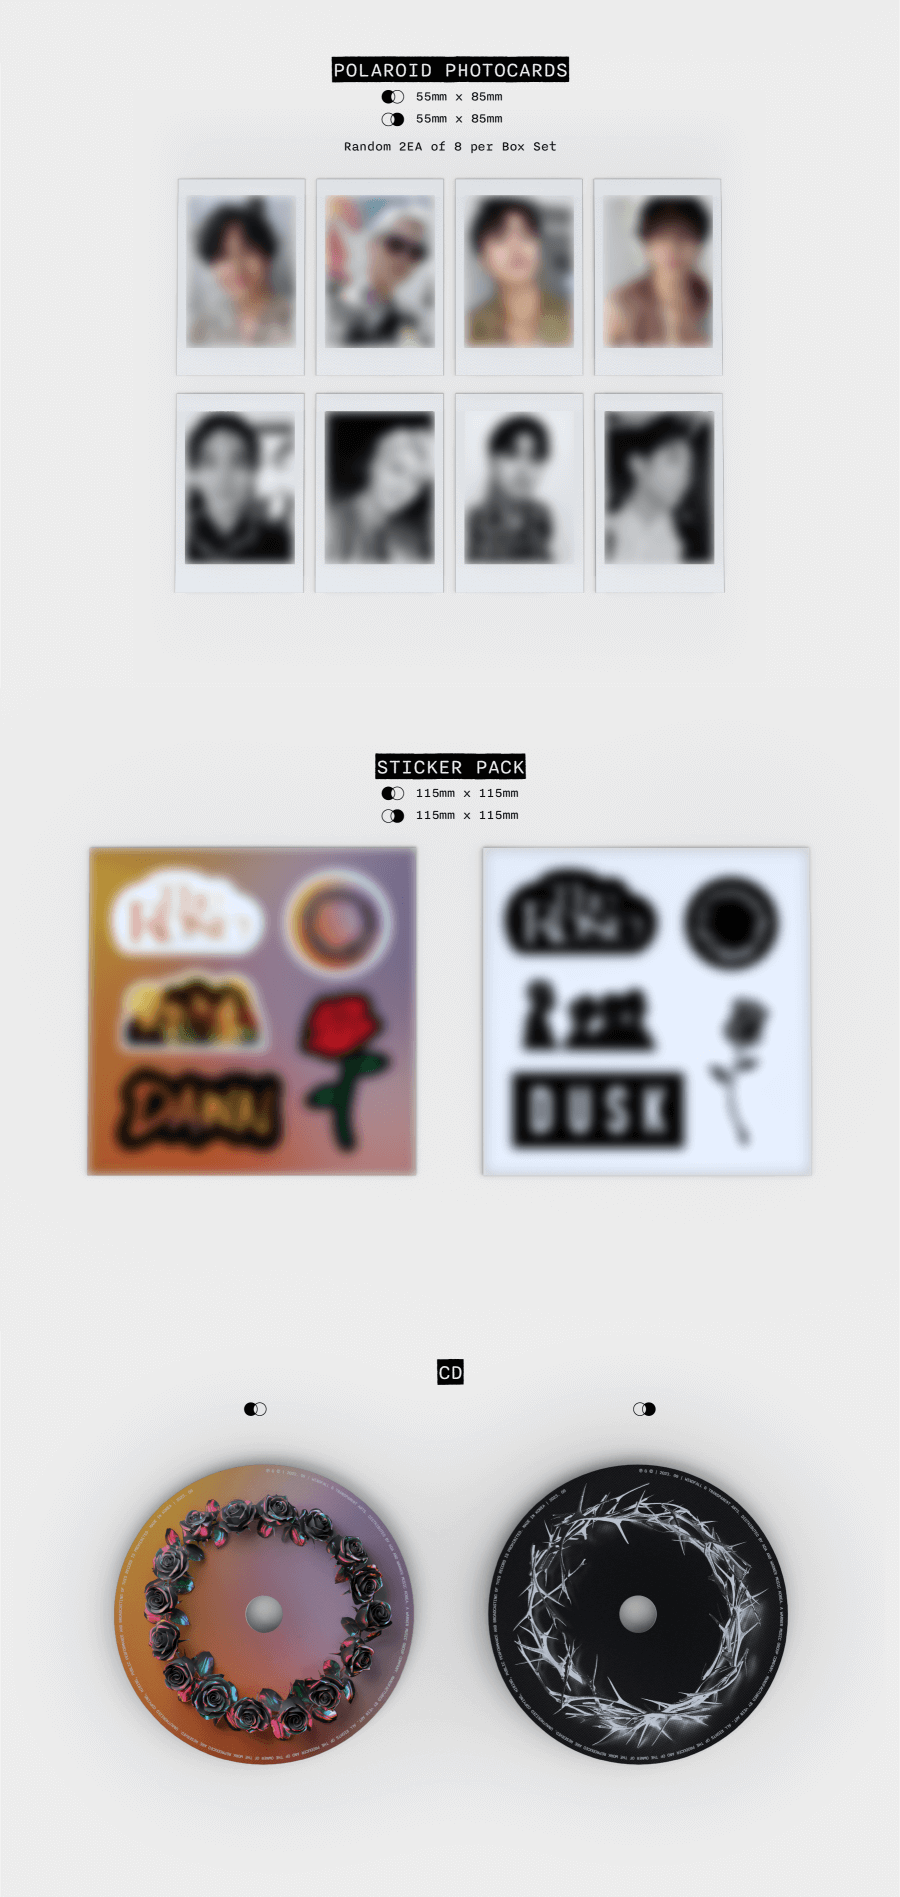 The Rose 2nd Full Album DUAL Jewel Version Inclusions Polaroid Photocards Sticker Pack CD